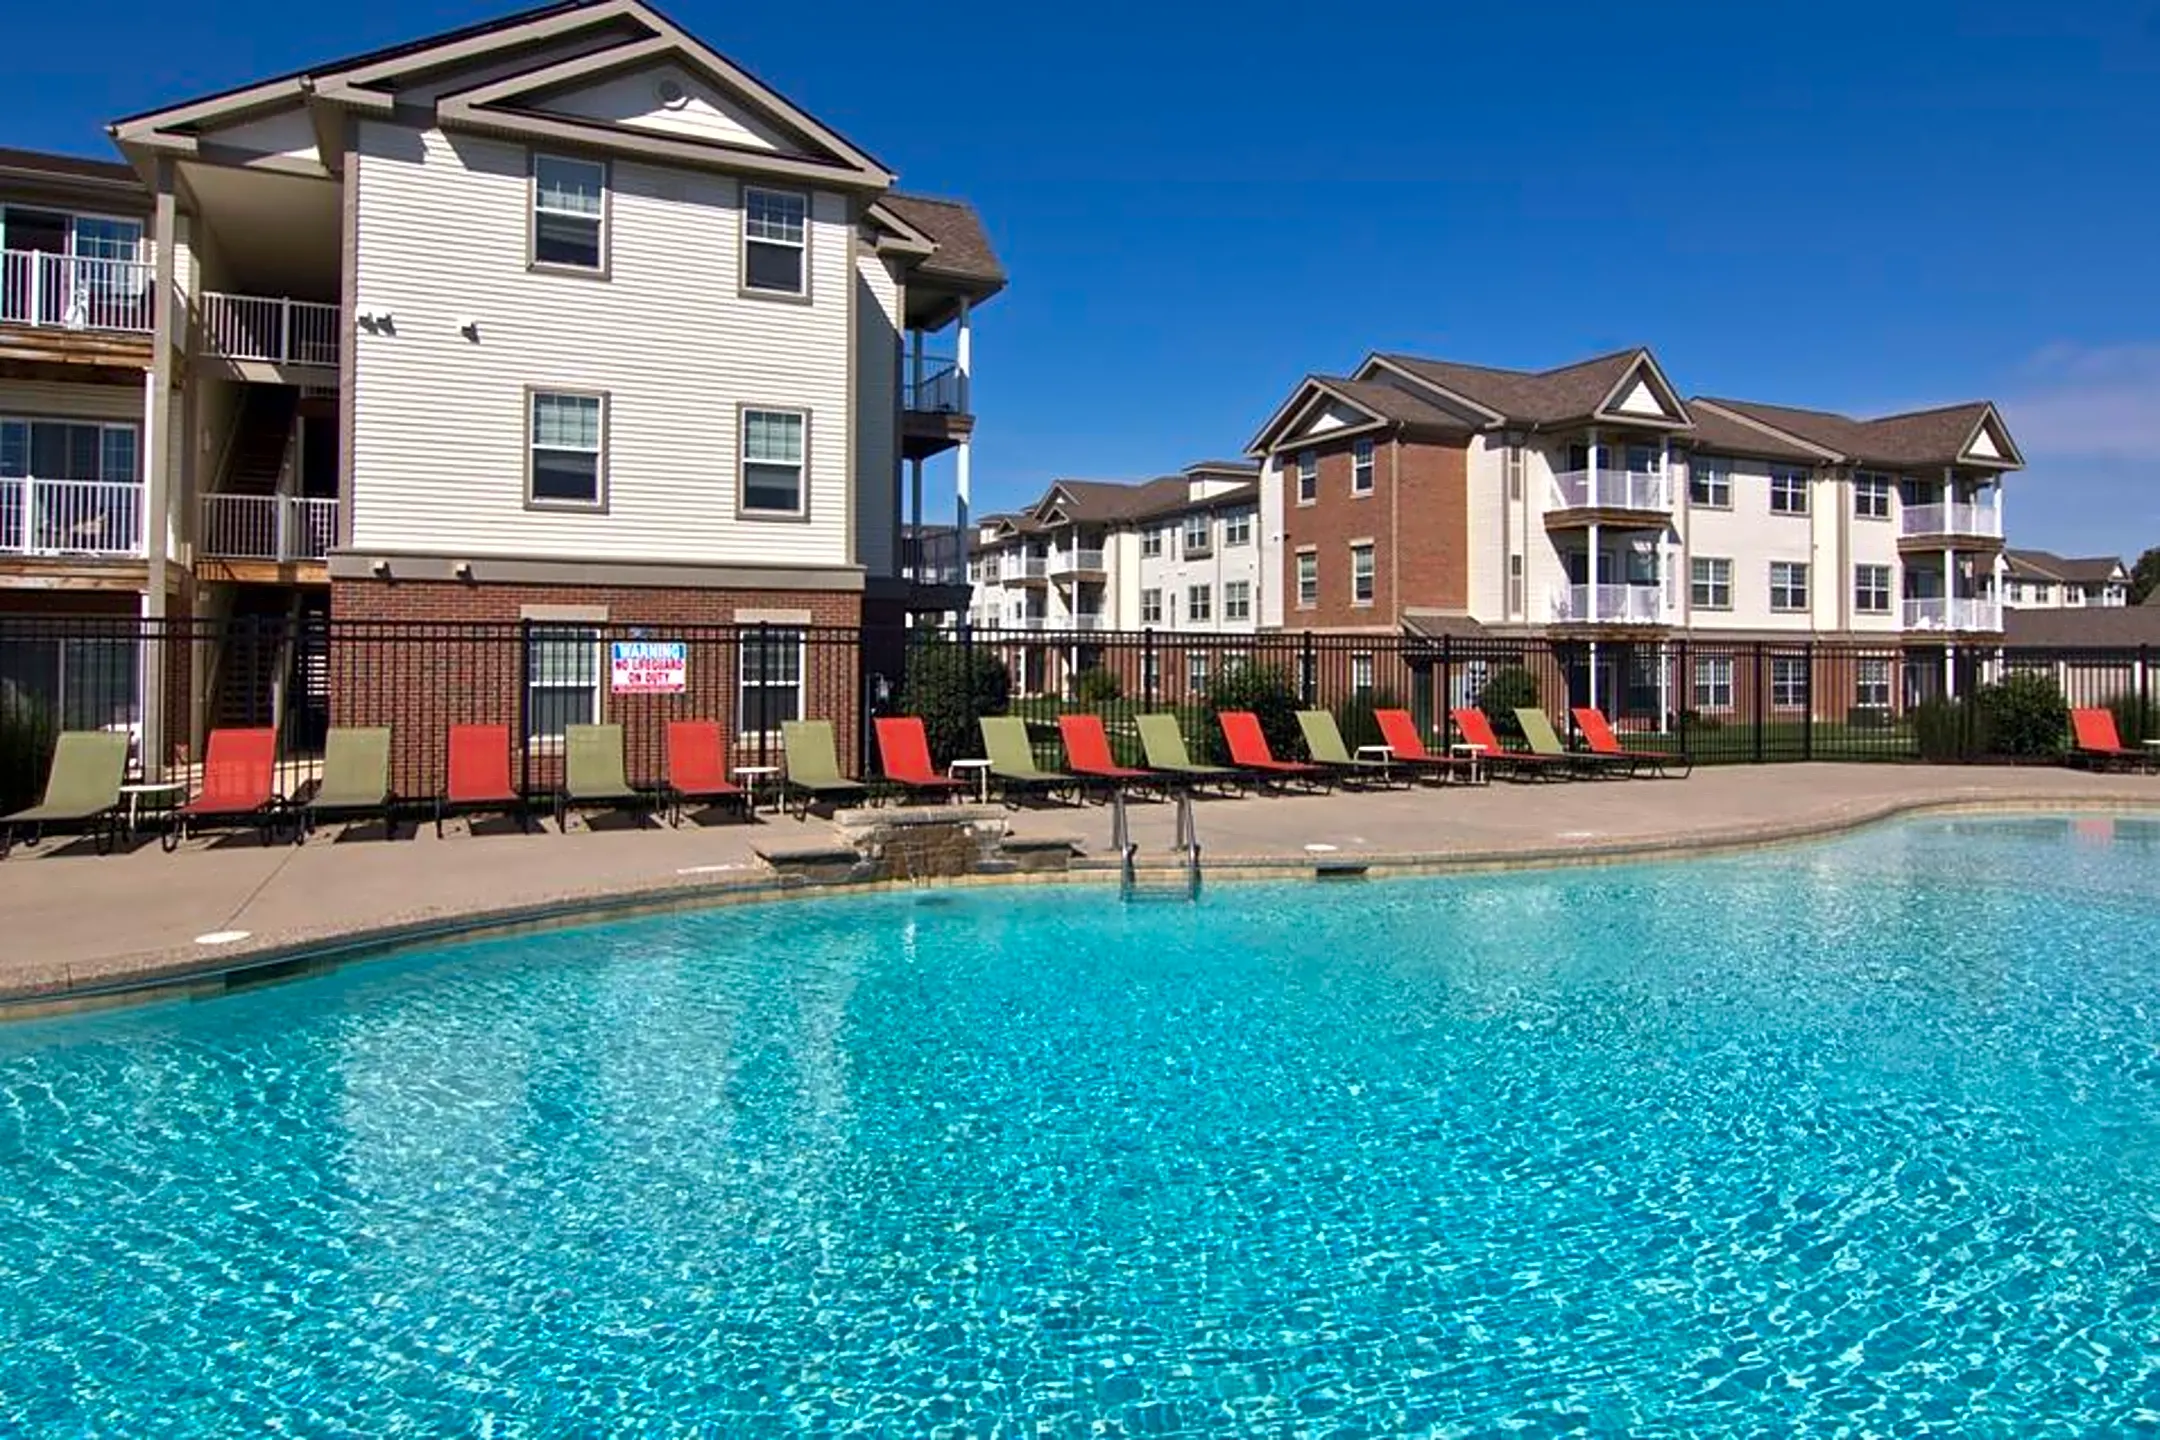 Pool - The Residences at Carronade - Perrysburg, OH